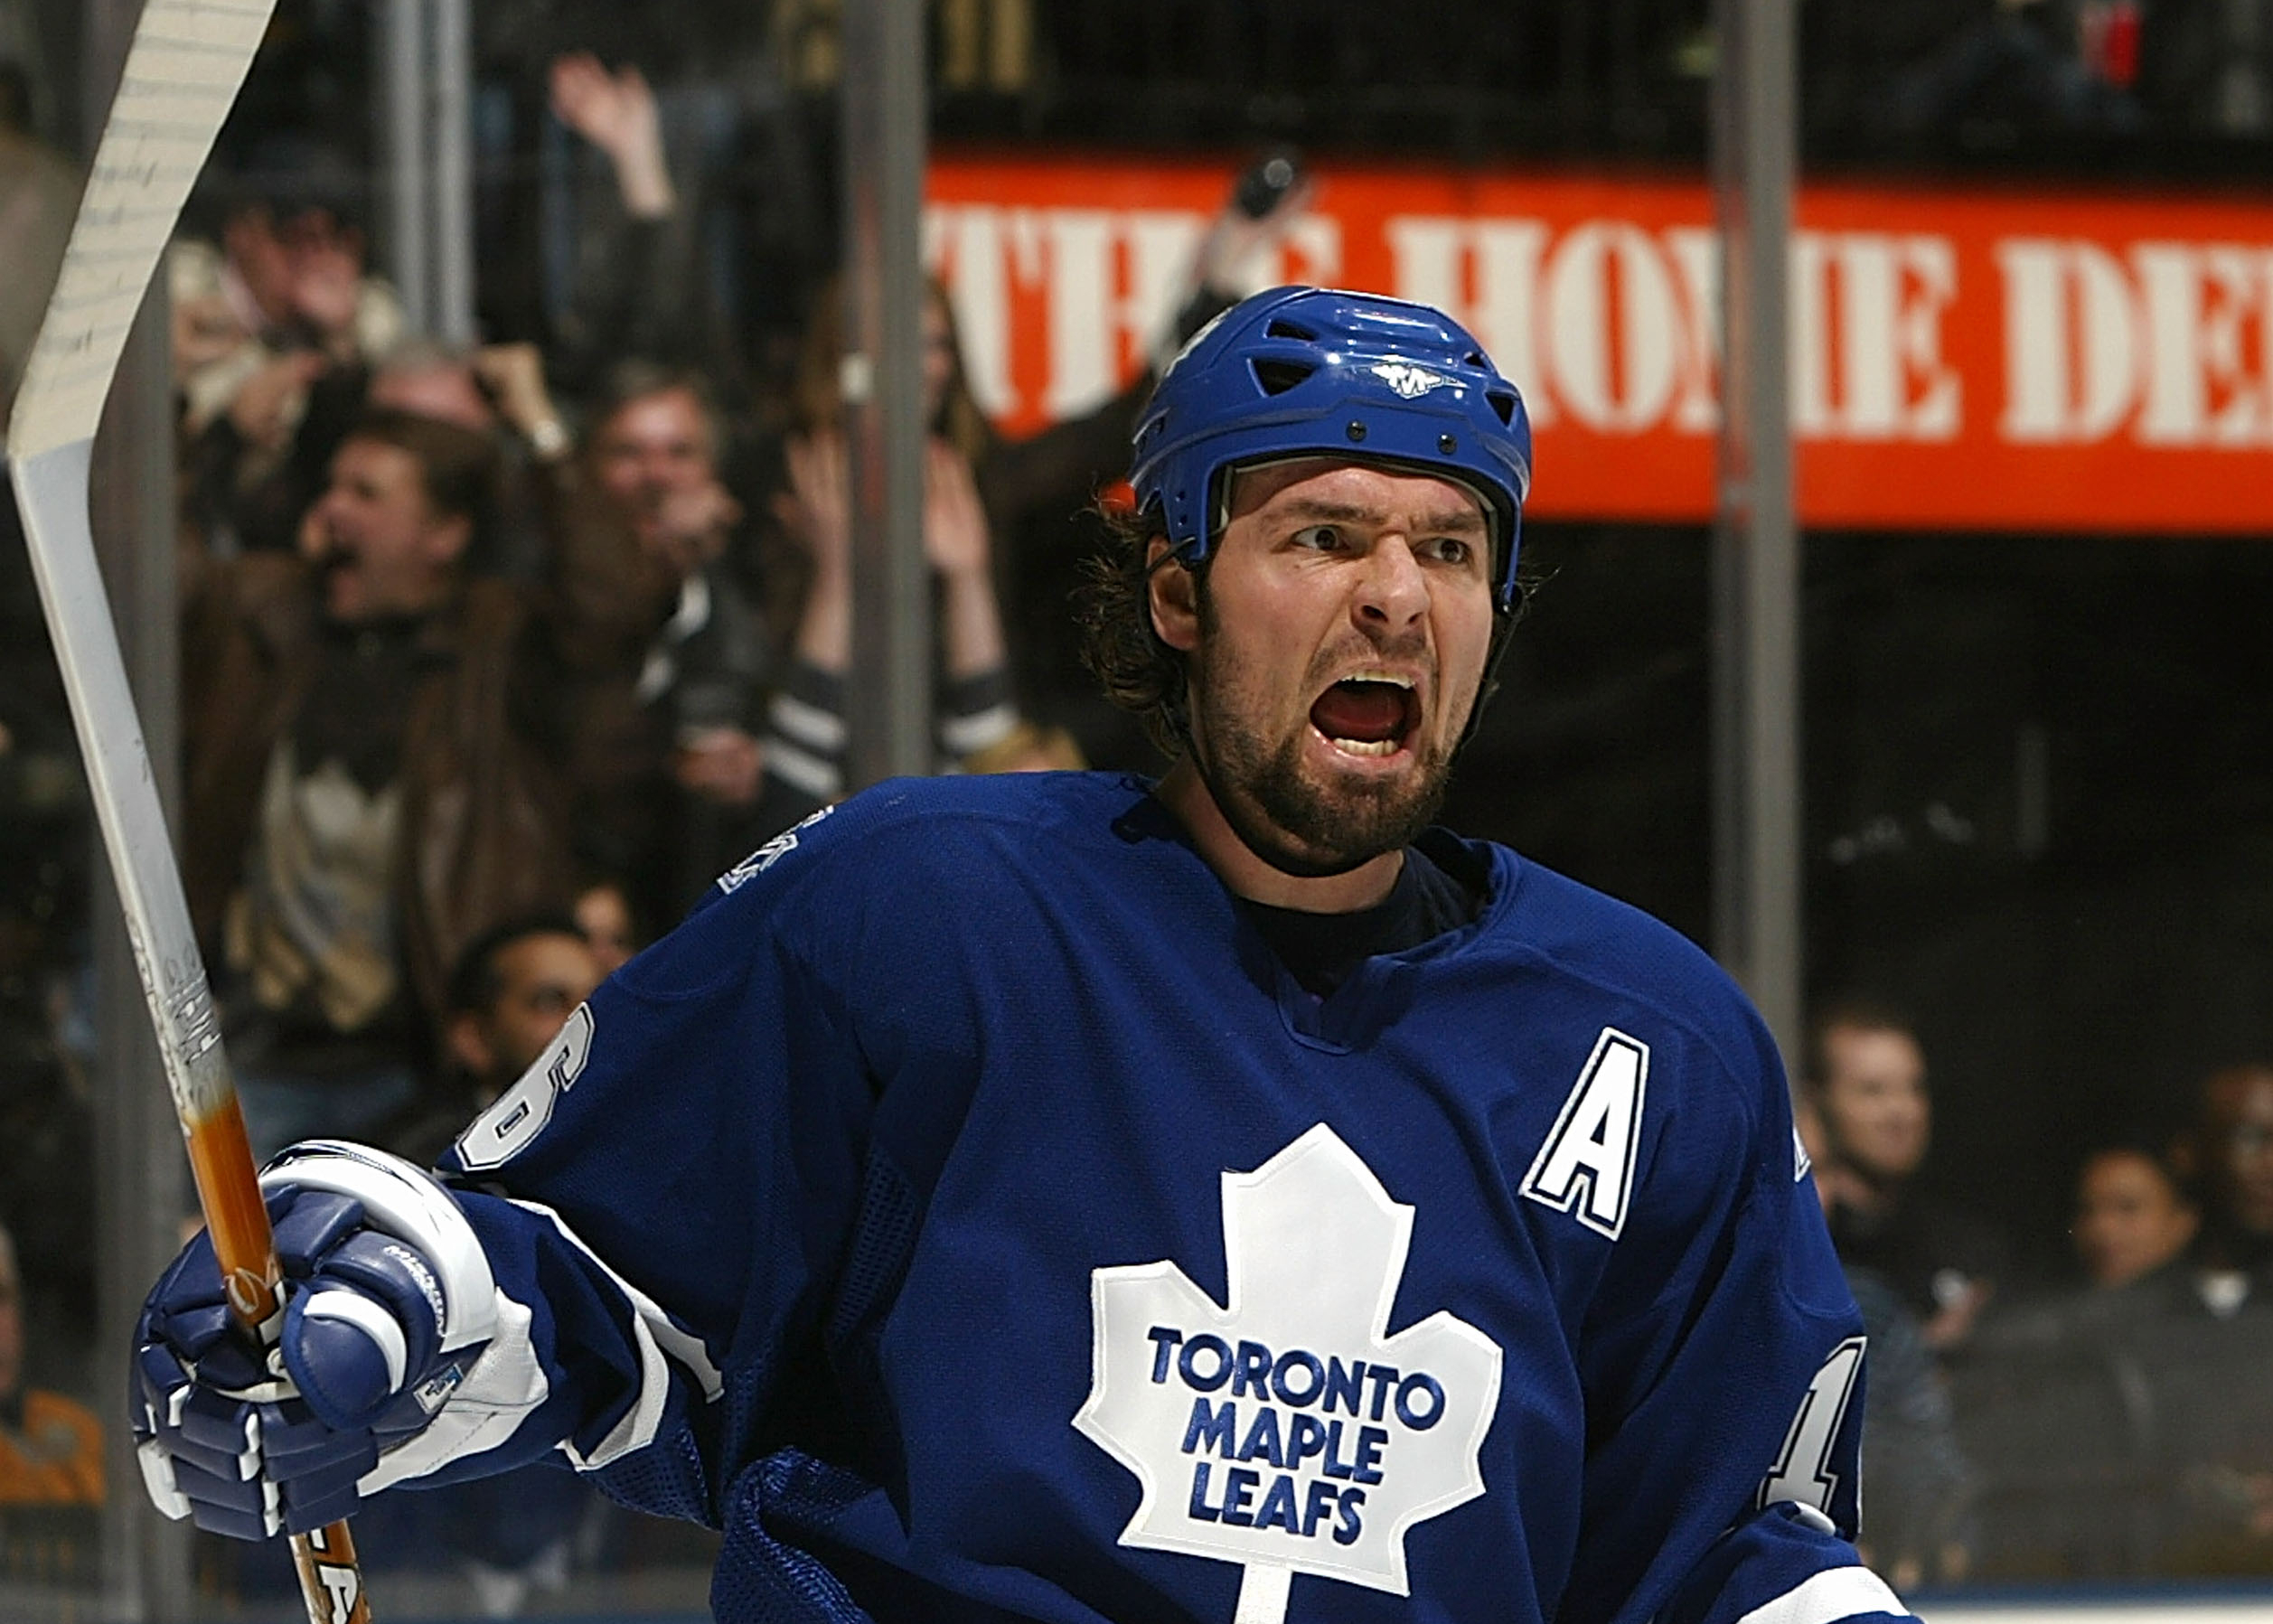 Q&A: Darcy Tucker on Hockey Day, Maple Leafs, courage and 'crazy eyes